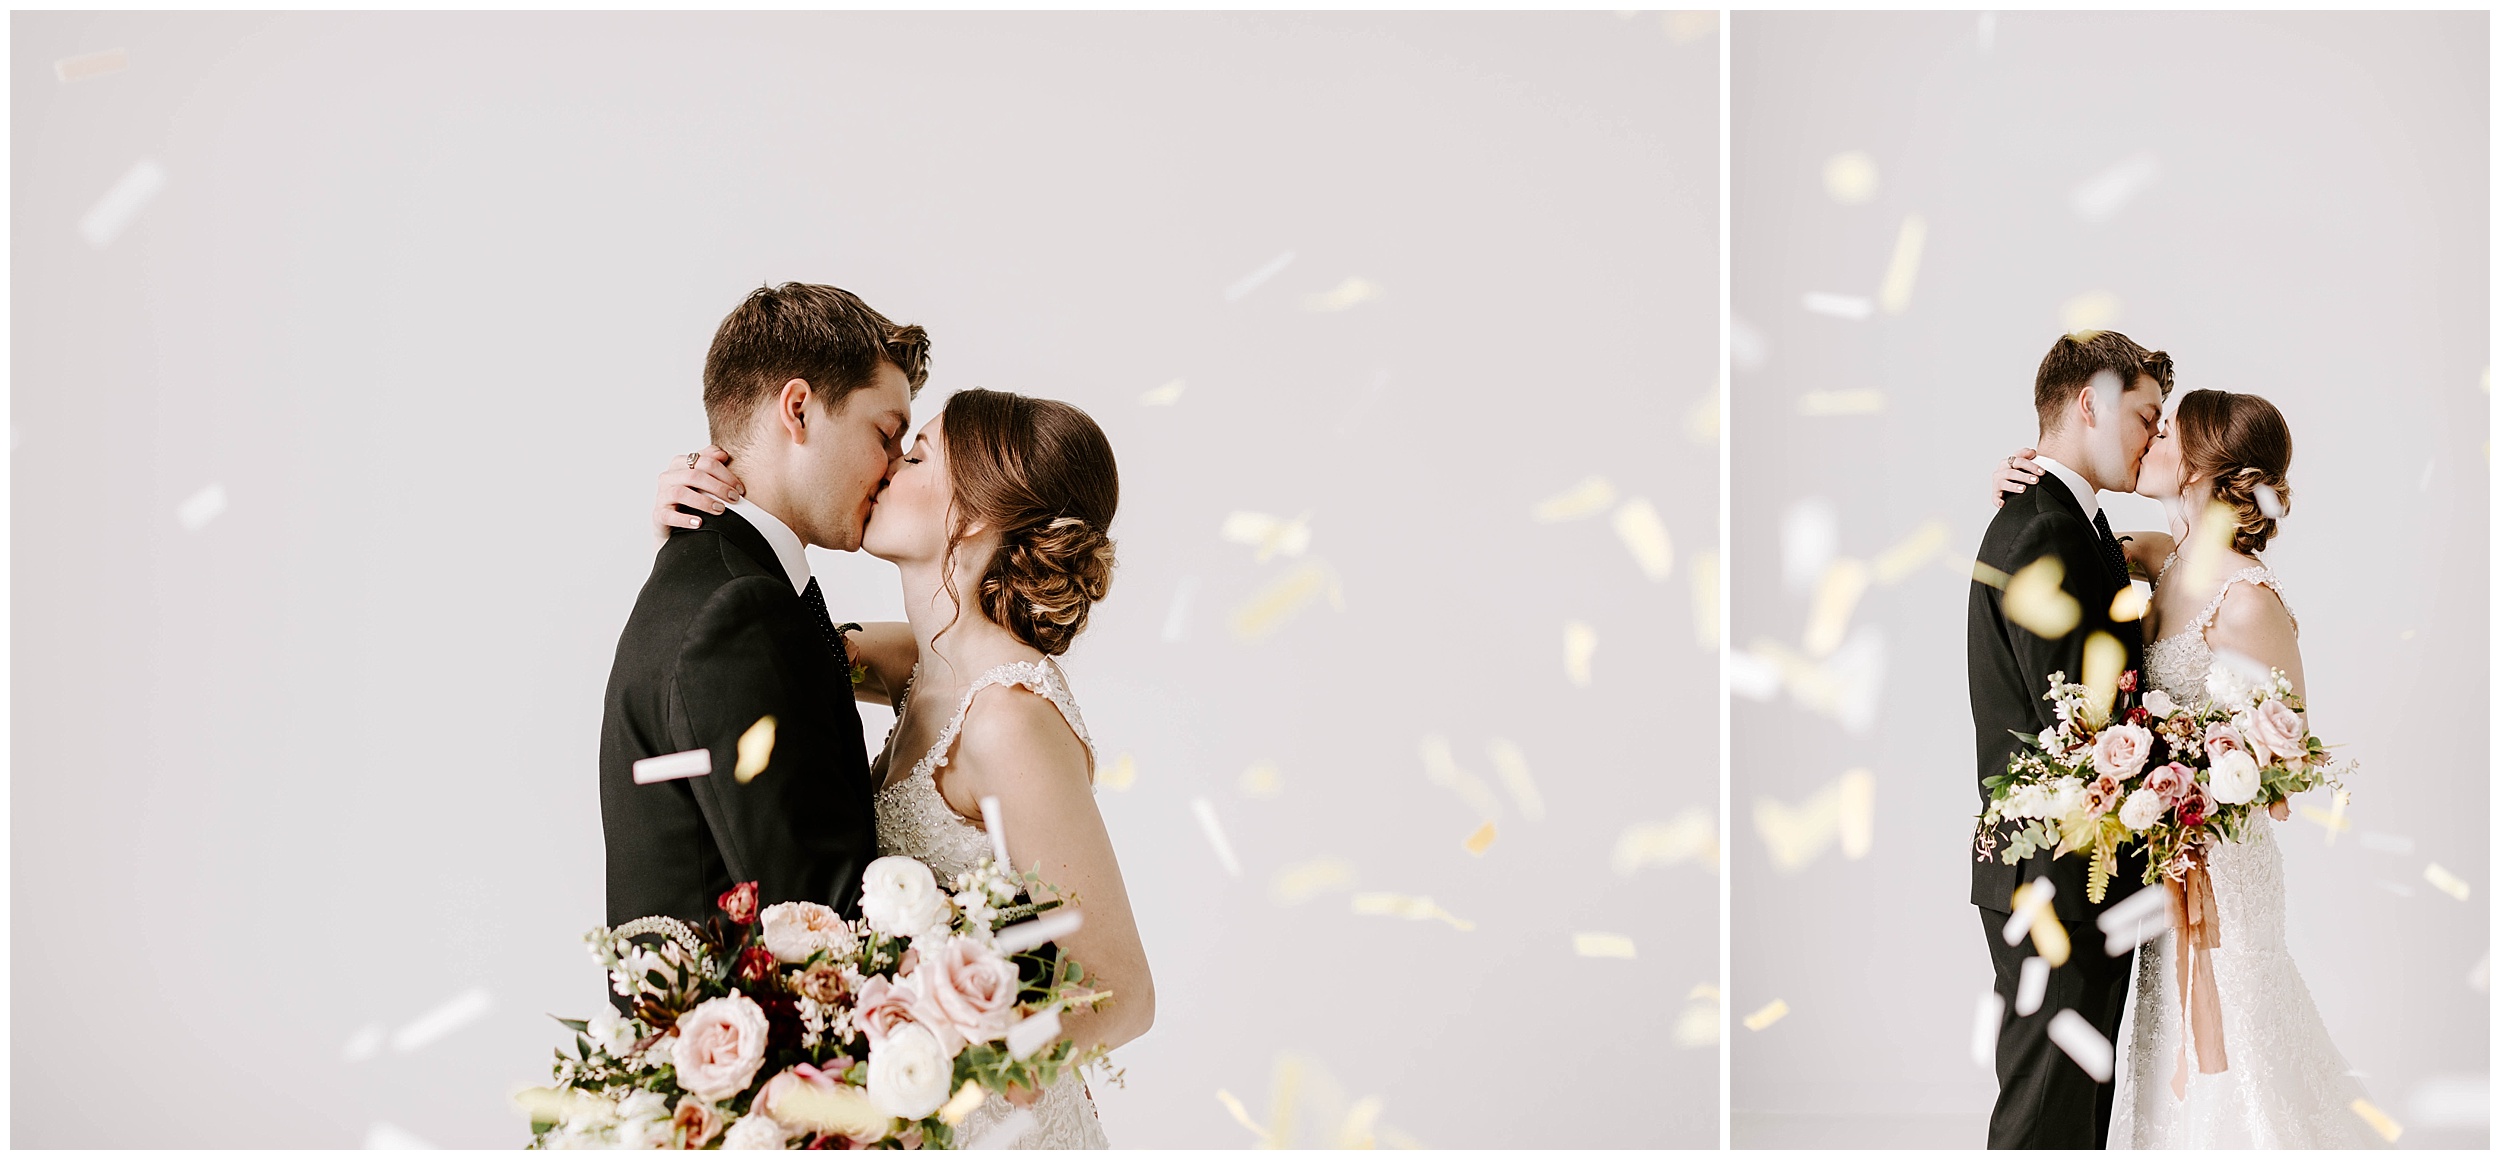 confetti wedding pictures, bridal portraits, SUPPLY Manheim bride and groom portraits, Madeline Isabella Photography